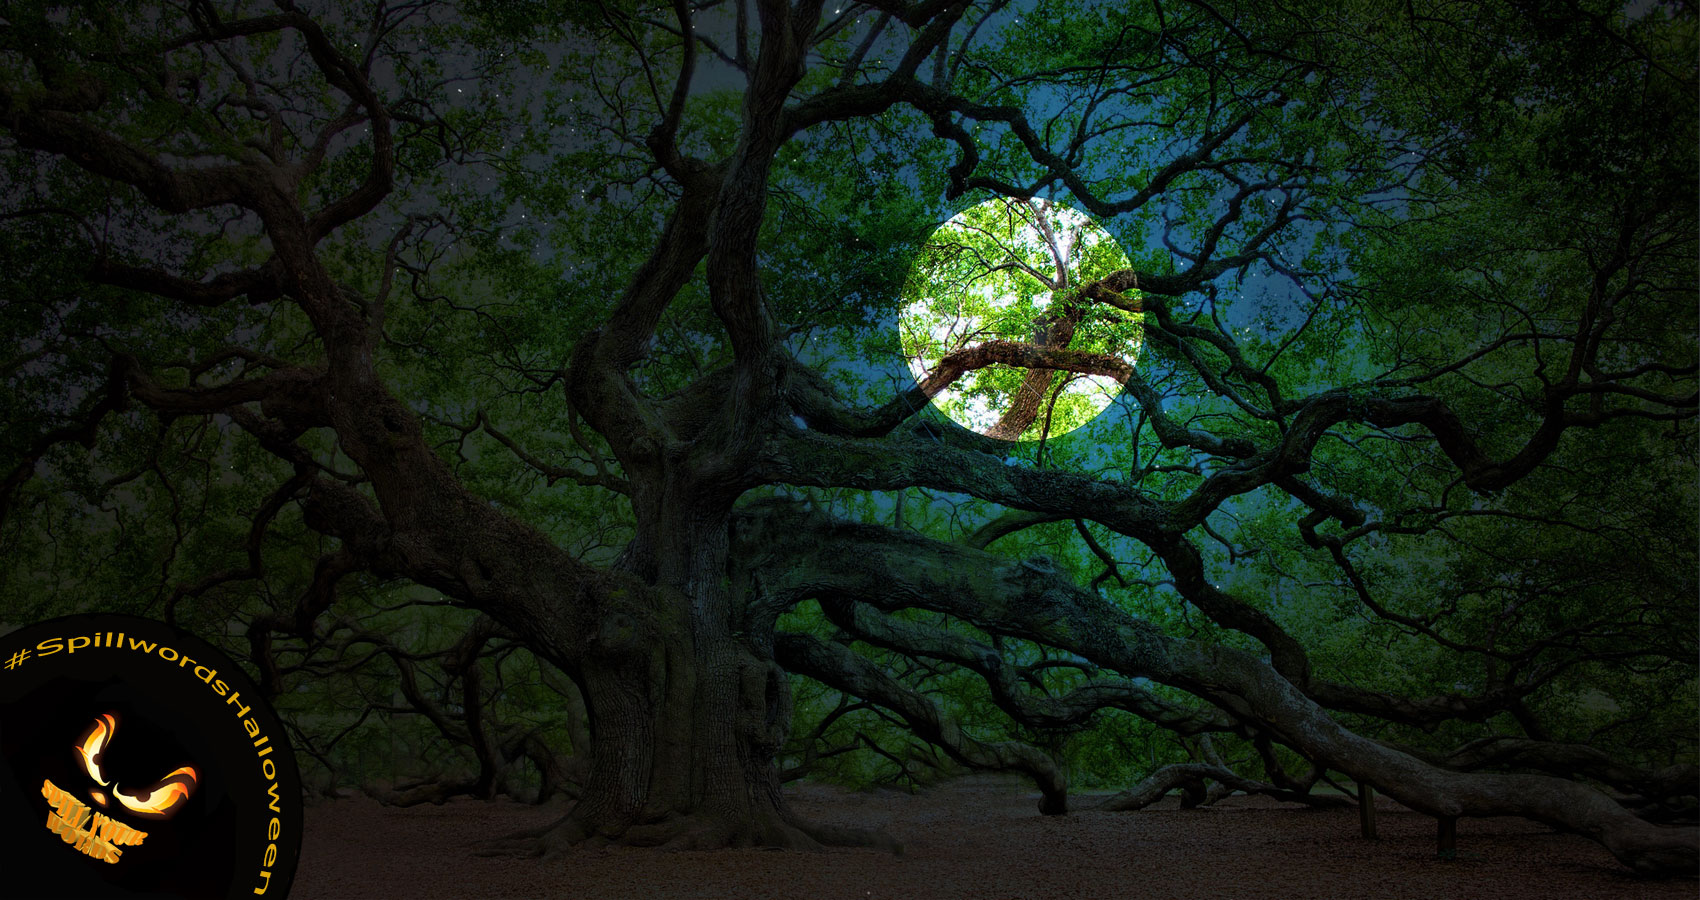 Underneath The Ancient Oak by Jan Smith at Spillwords.com